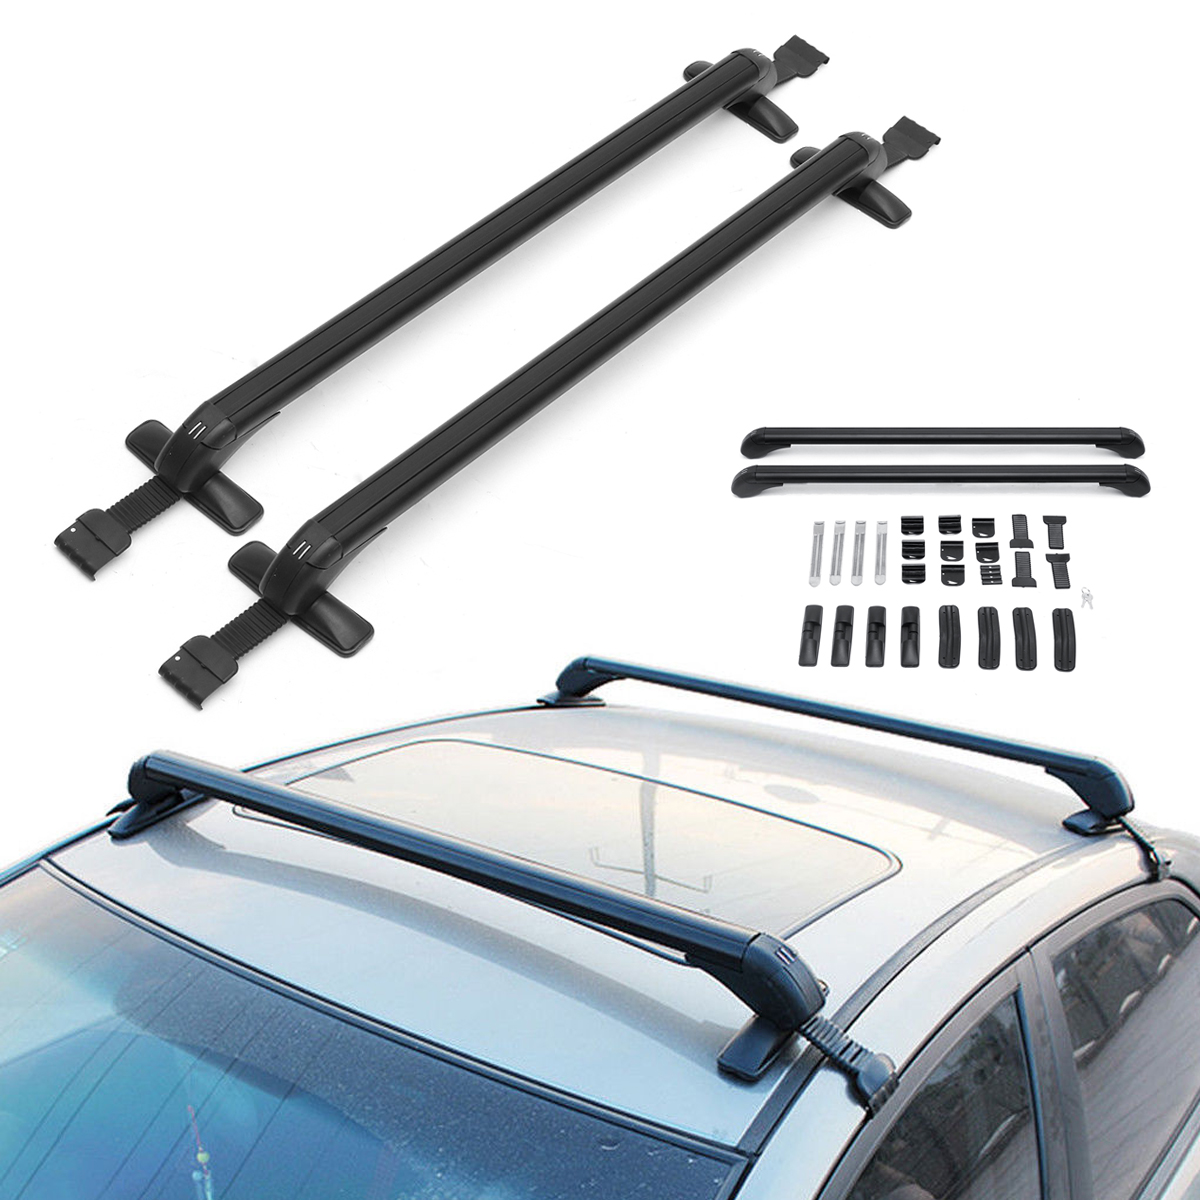 Aluminum Car Roof Rack Cross Bars Luggage Carrier For 4DR and 5DR